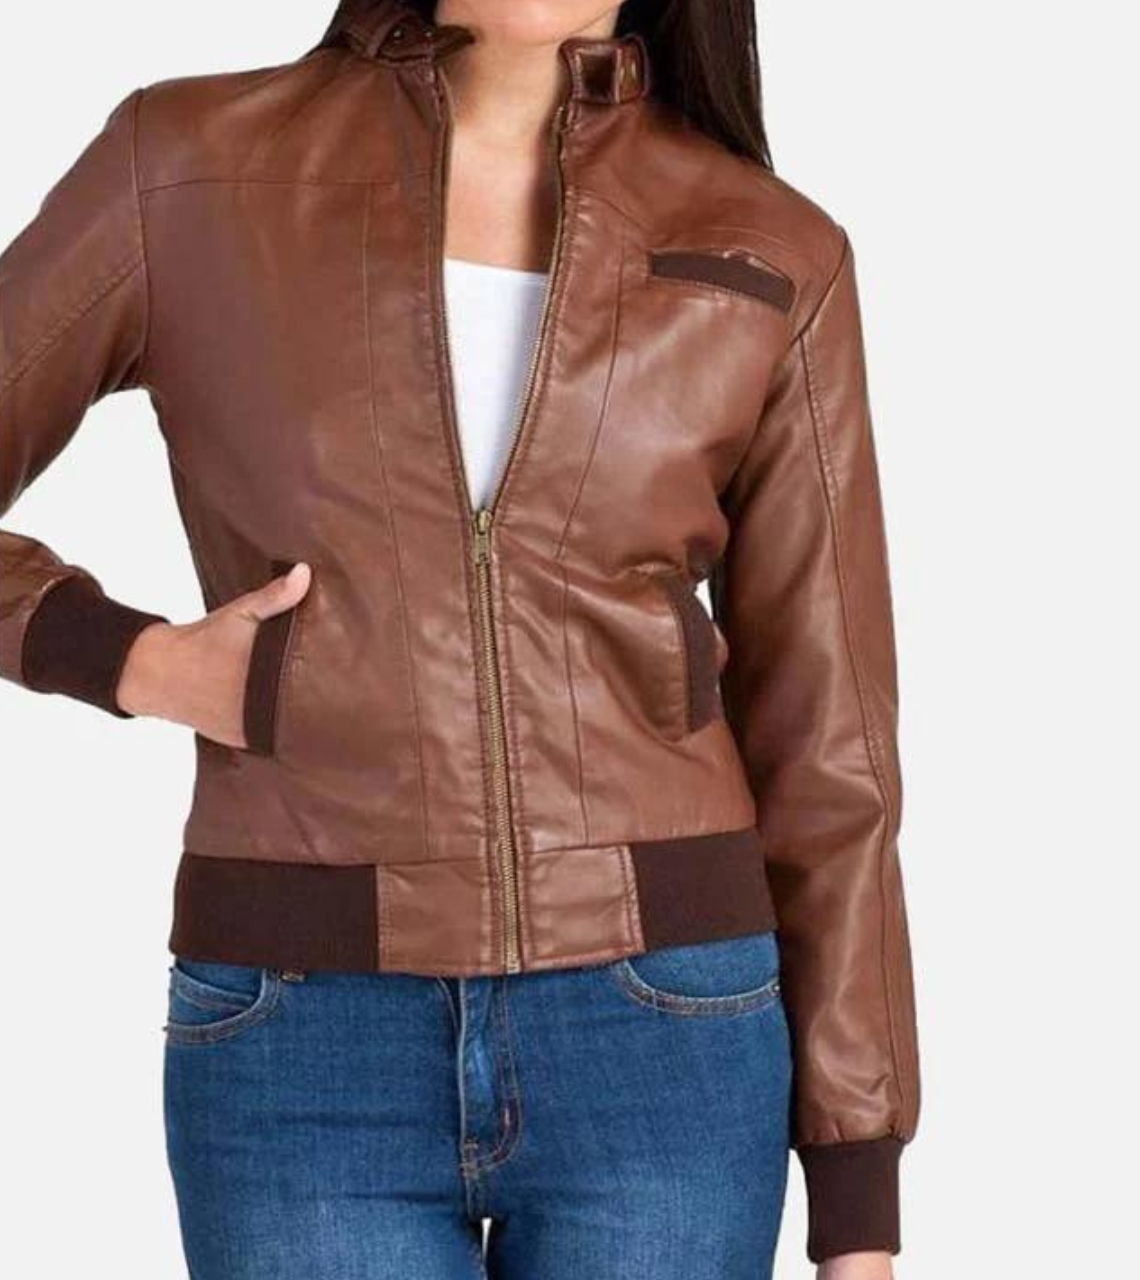  Women’s Leather Bomber Jacket - Brown 